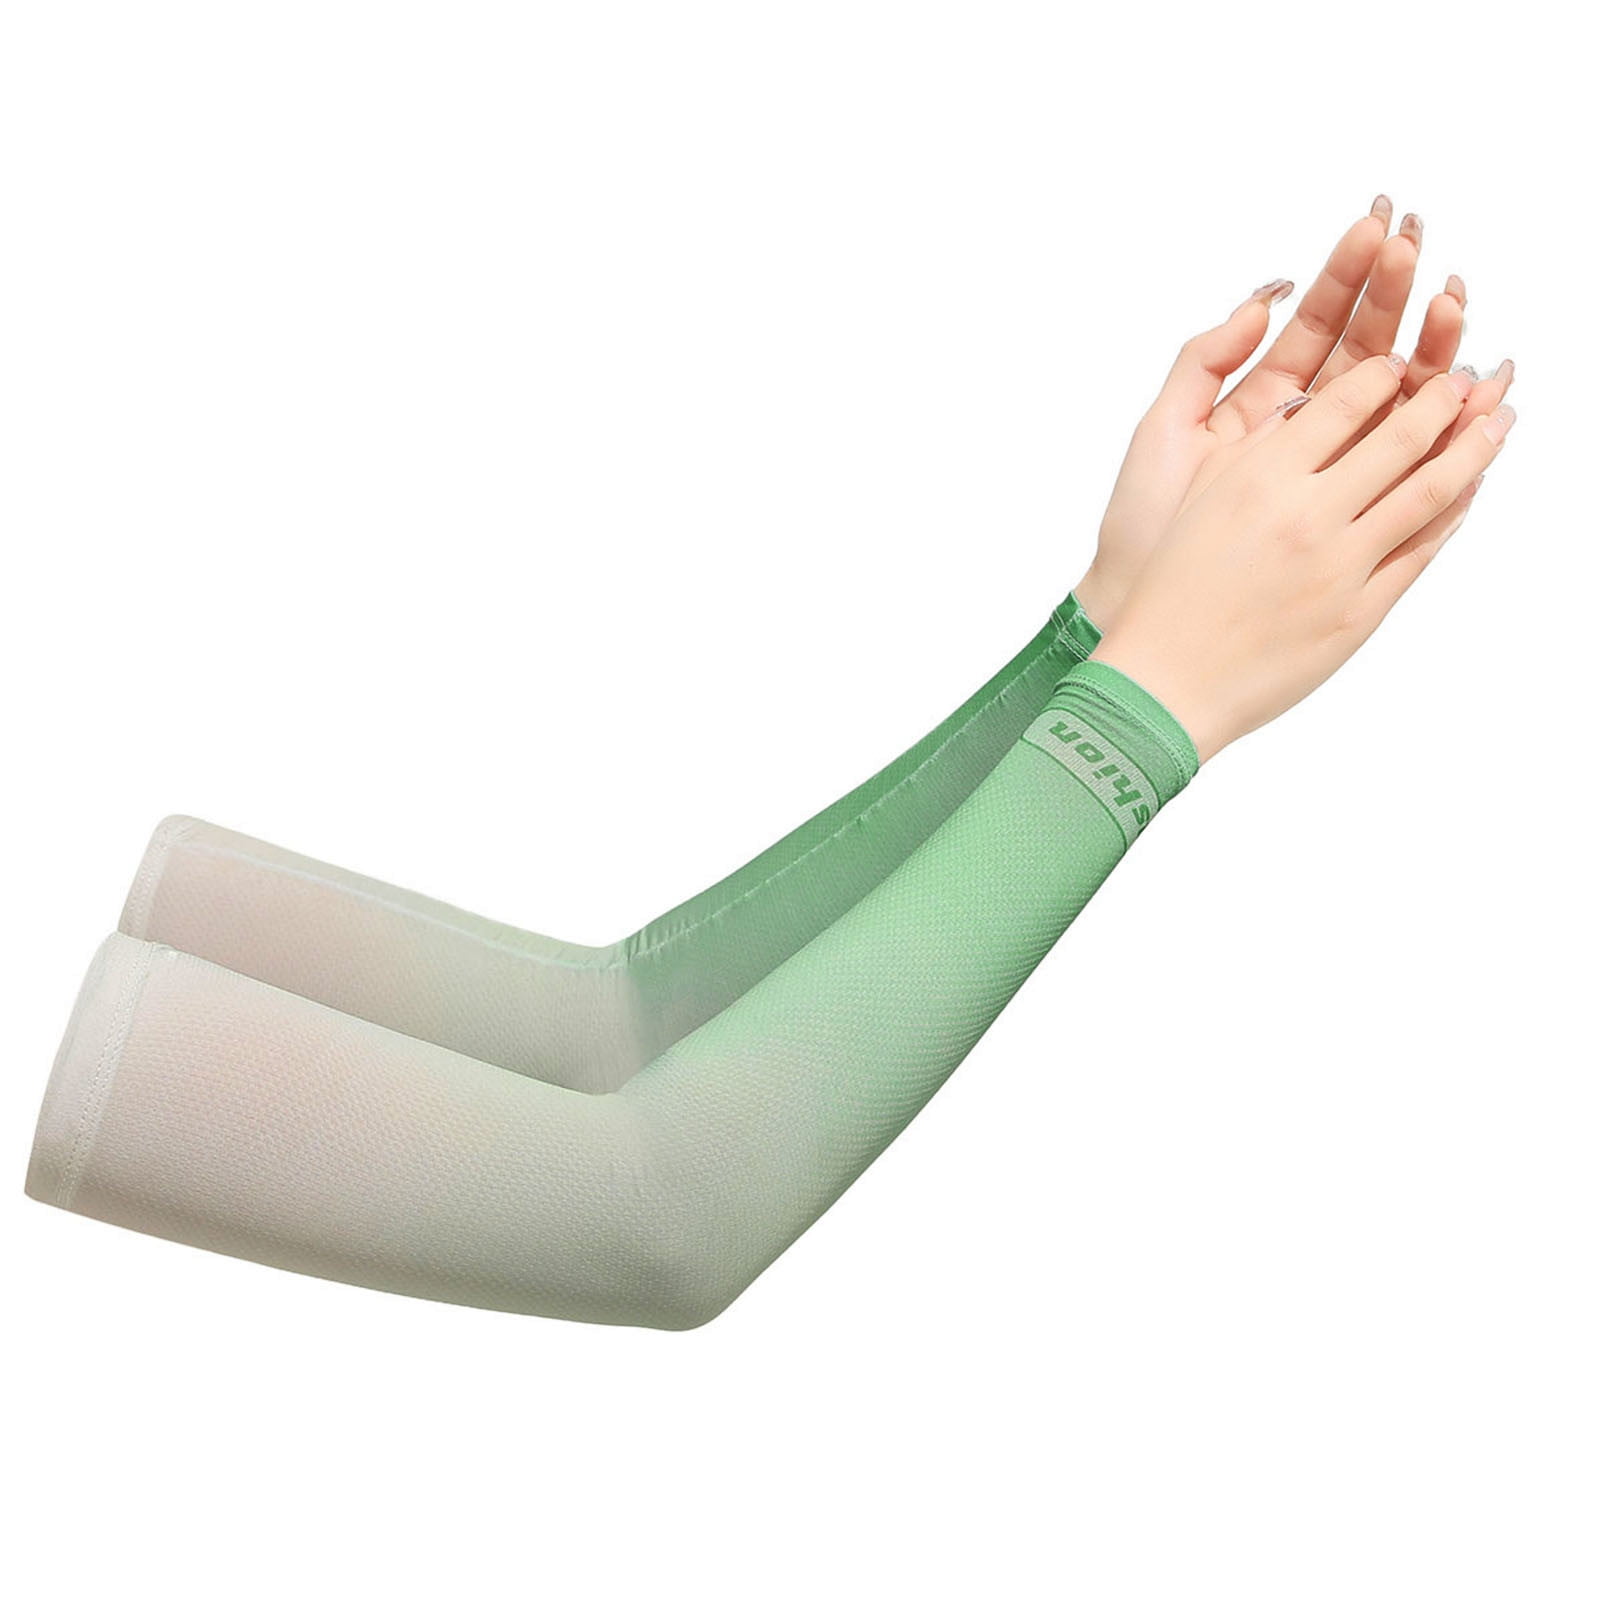 YUEHAO Men Women Summer Outdoors Breathable Sun Sleeves Protection Arm  Sleeves Arm Cover Sleeve Green 